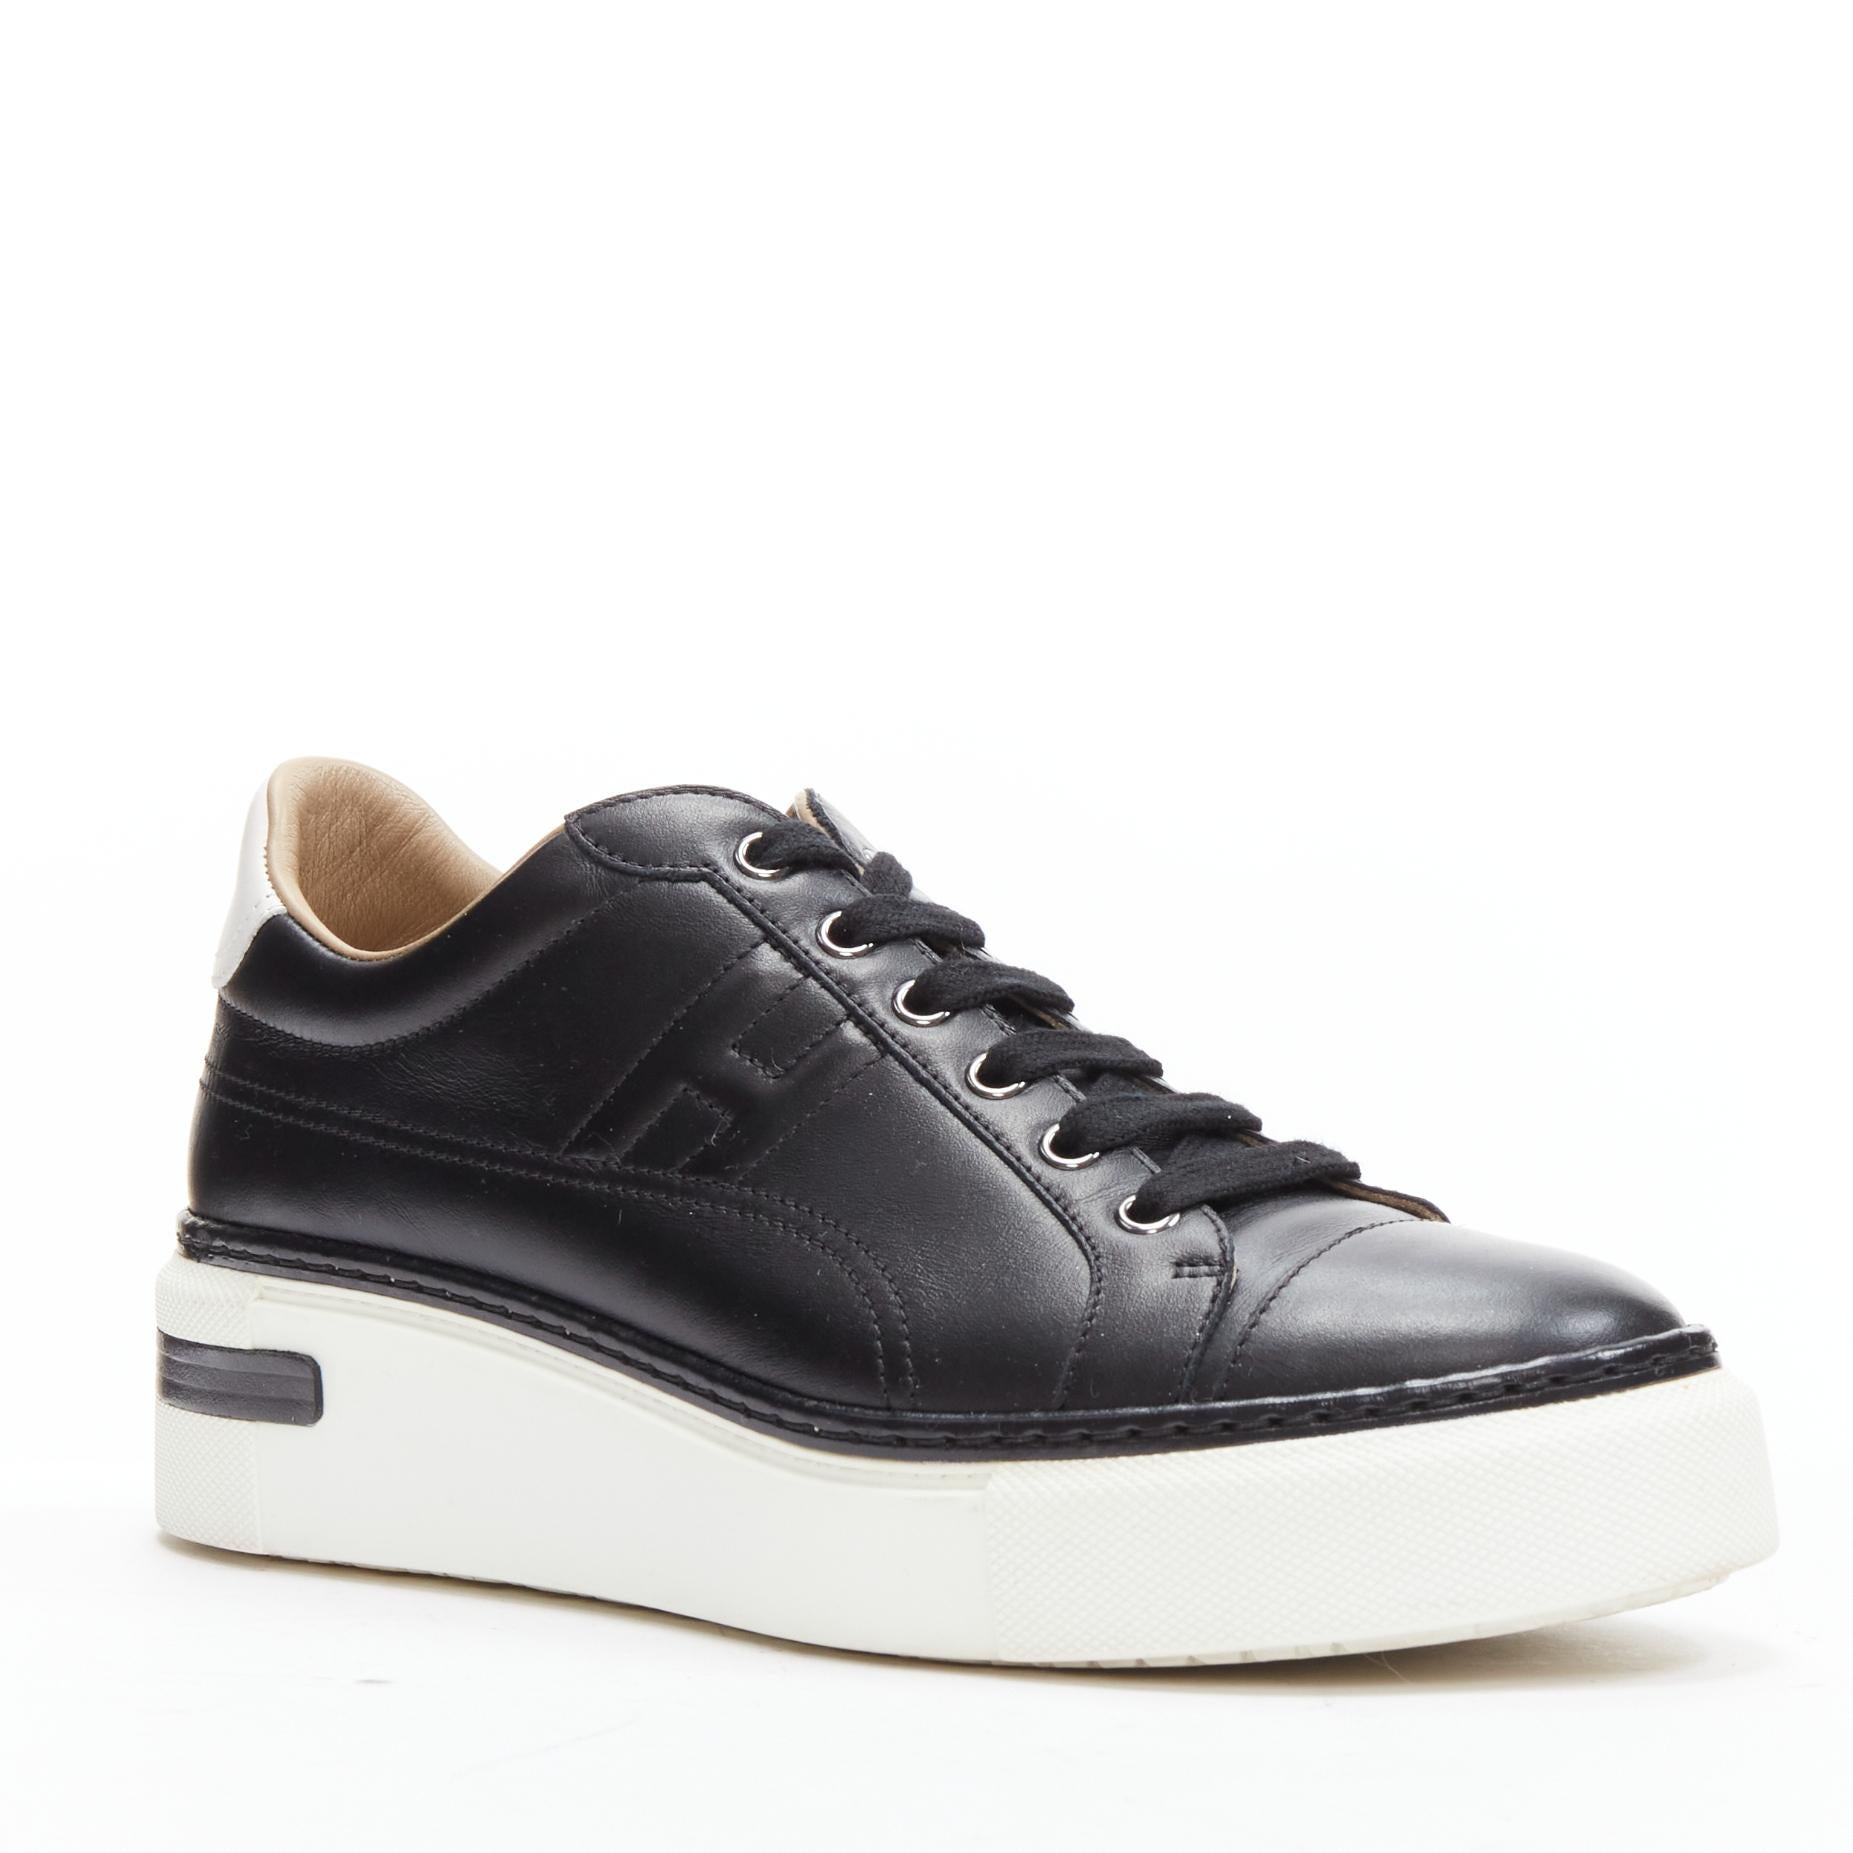 HERMES Polo black leather H padded logo white platform sneakers EU39
Reference: JYLM/A00047
Brand: Hermes
Model: Polo
Material: Leather
Color: Black
Pattern: Solid
Closure: Lace Up
Lining: Nude Leather
Extra Details: hite embossed logos at back of